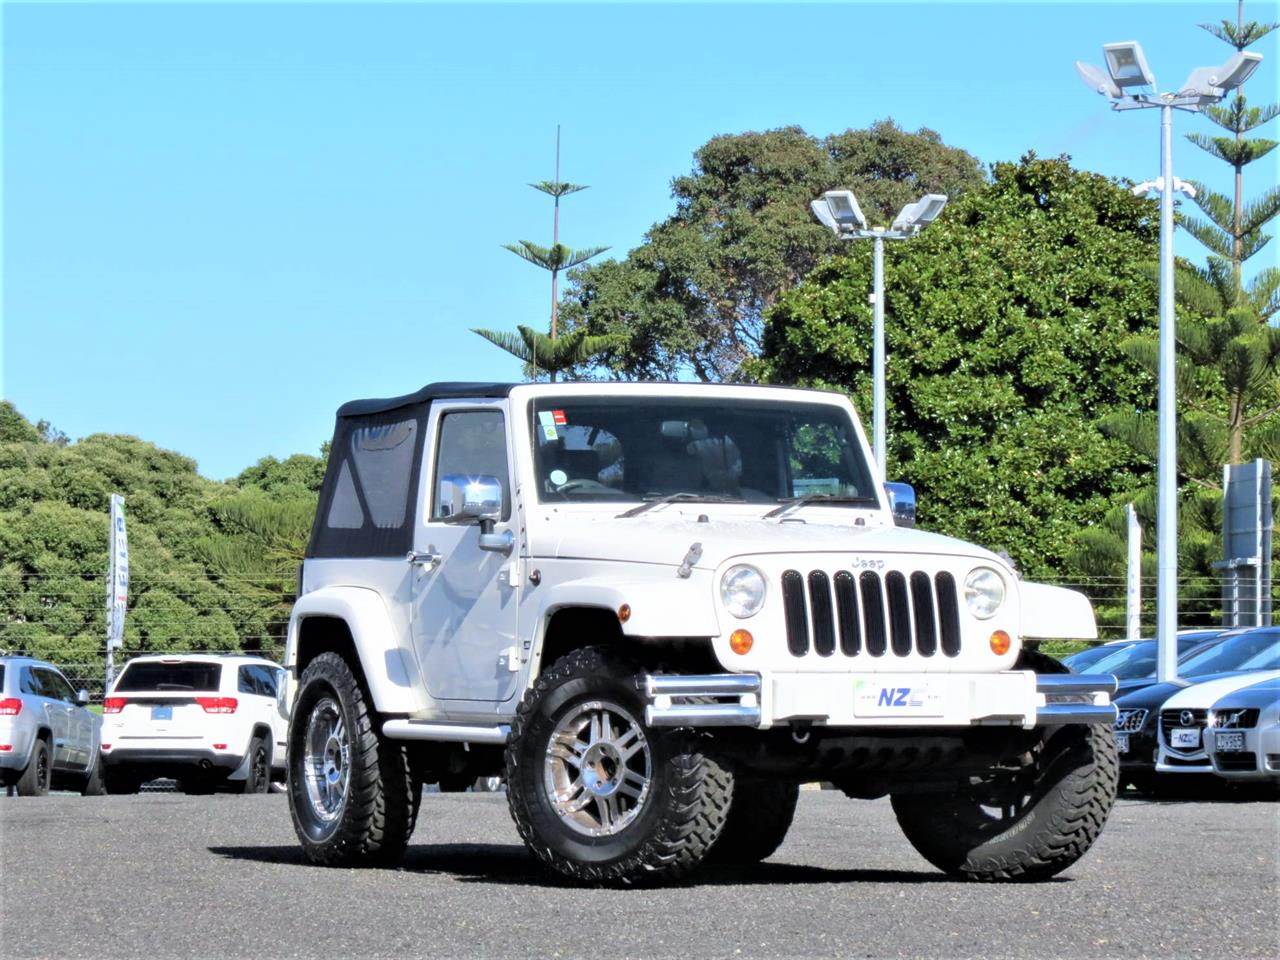 NZC best hot price for 2009 Jeep WRANGLER in Auckland